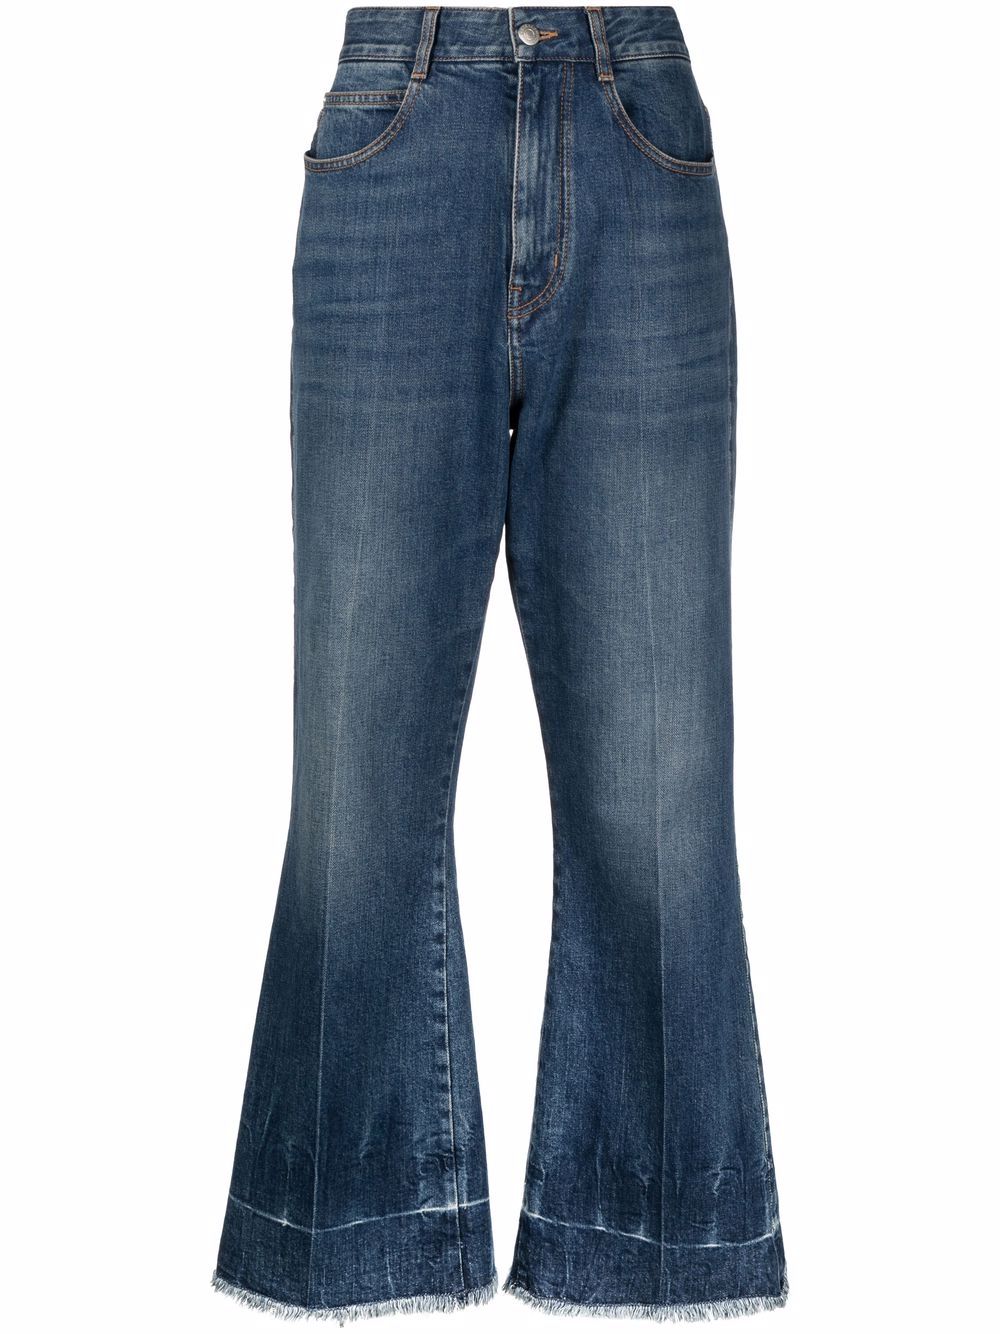 The '90s cropped flared jeans